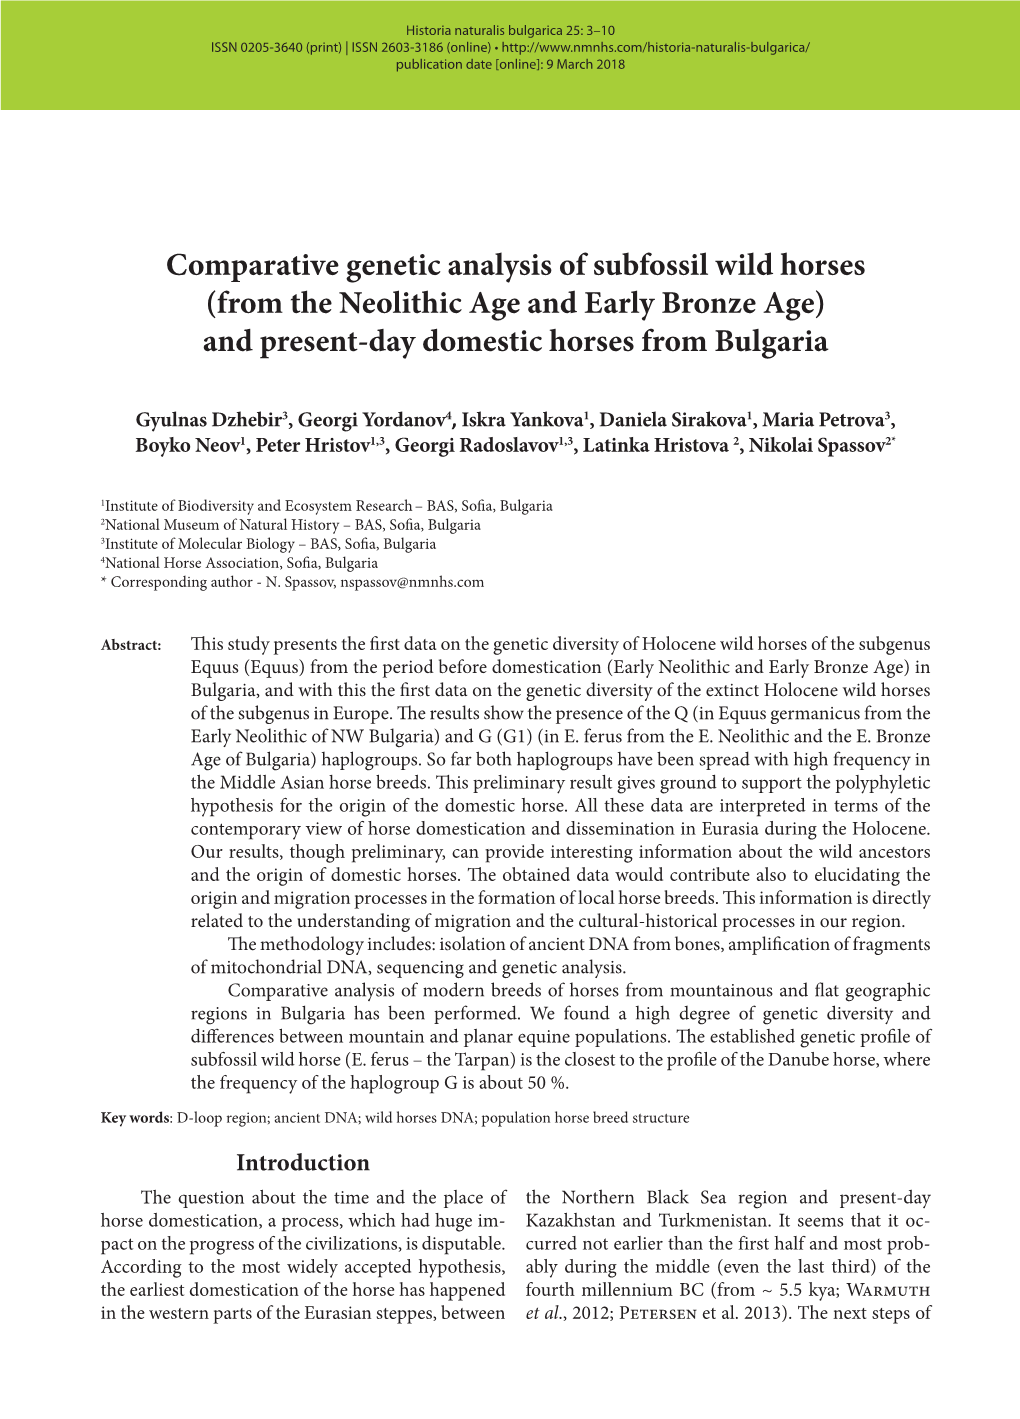 Comparative Genetic Analysis of Subfossil Wild Horses (From the Neolithic Age and Early Bronze Age) and Present-Day Domestic Horses from Bulgaria